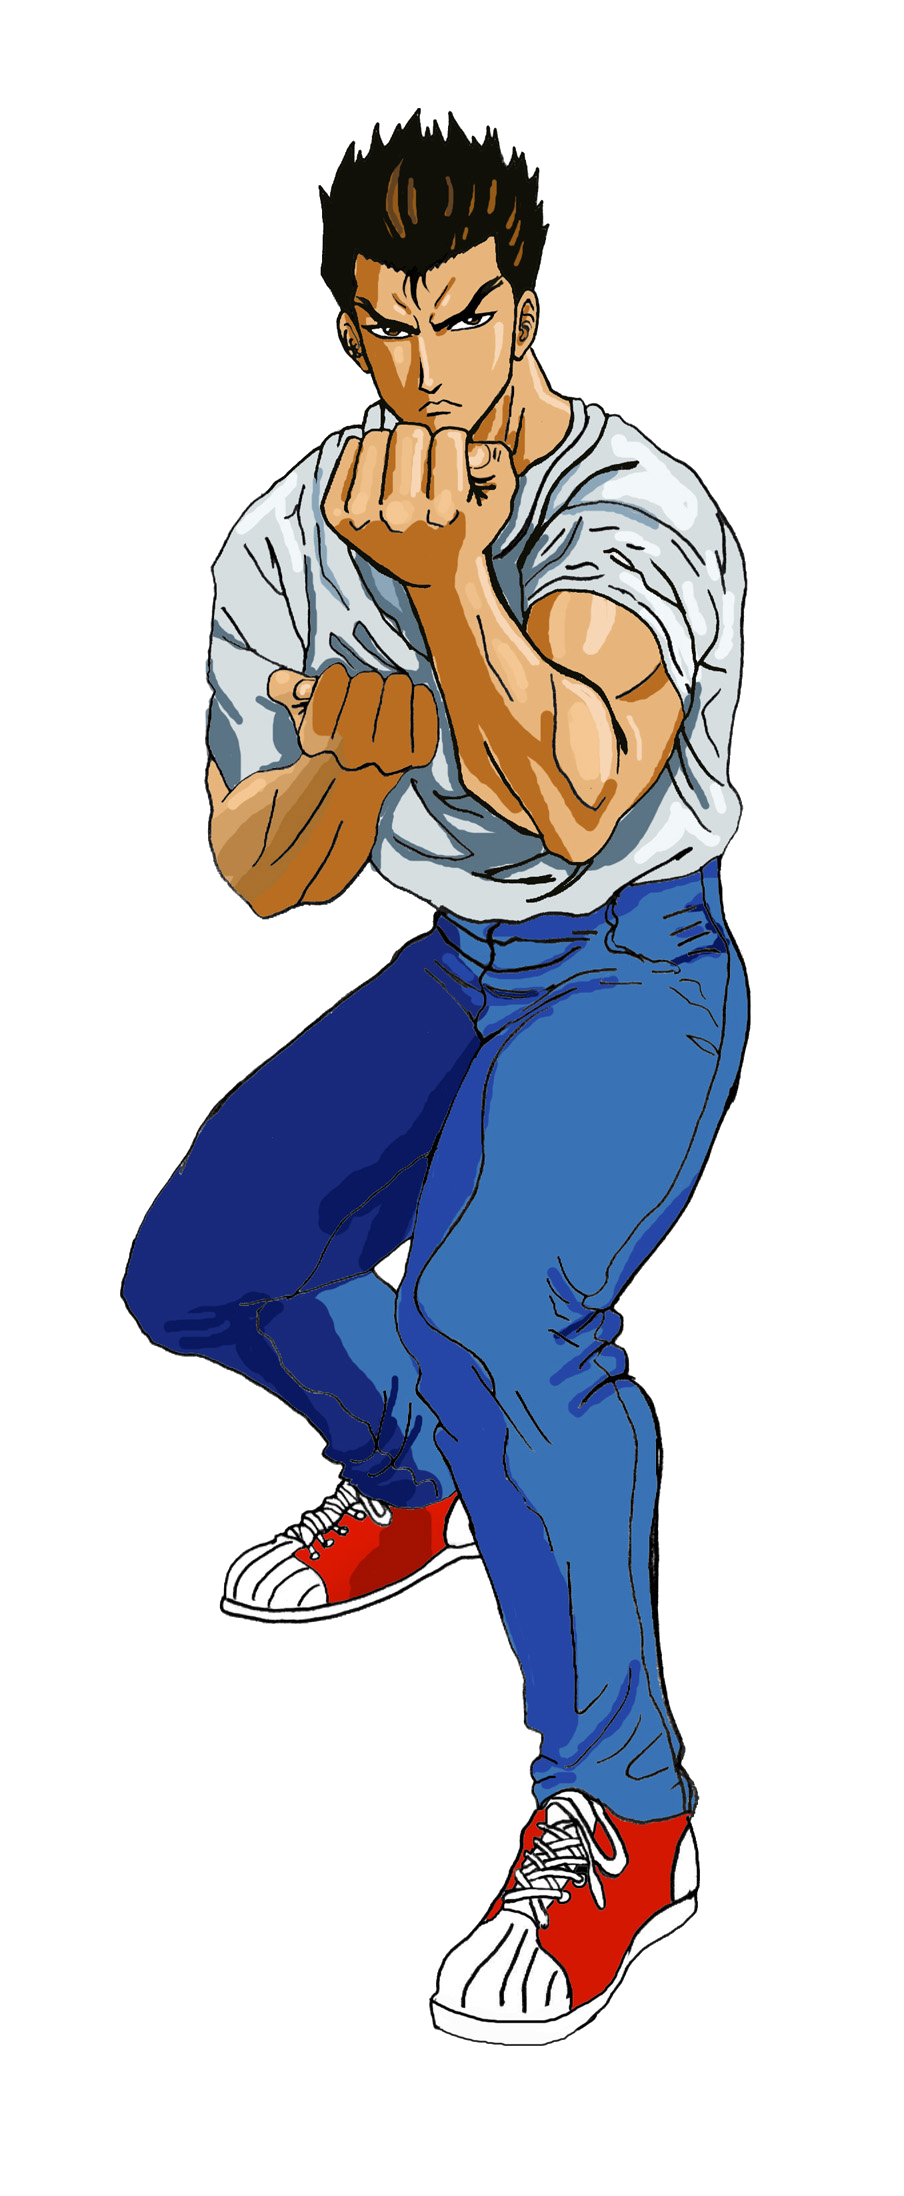 Ryu - Victory Pose by DHK88 on DeviantArt